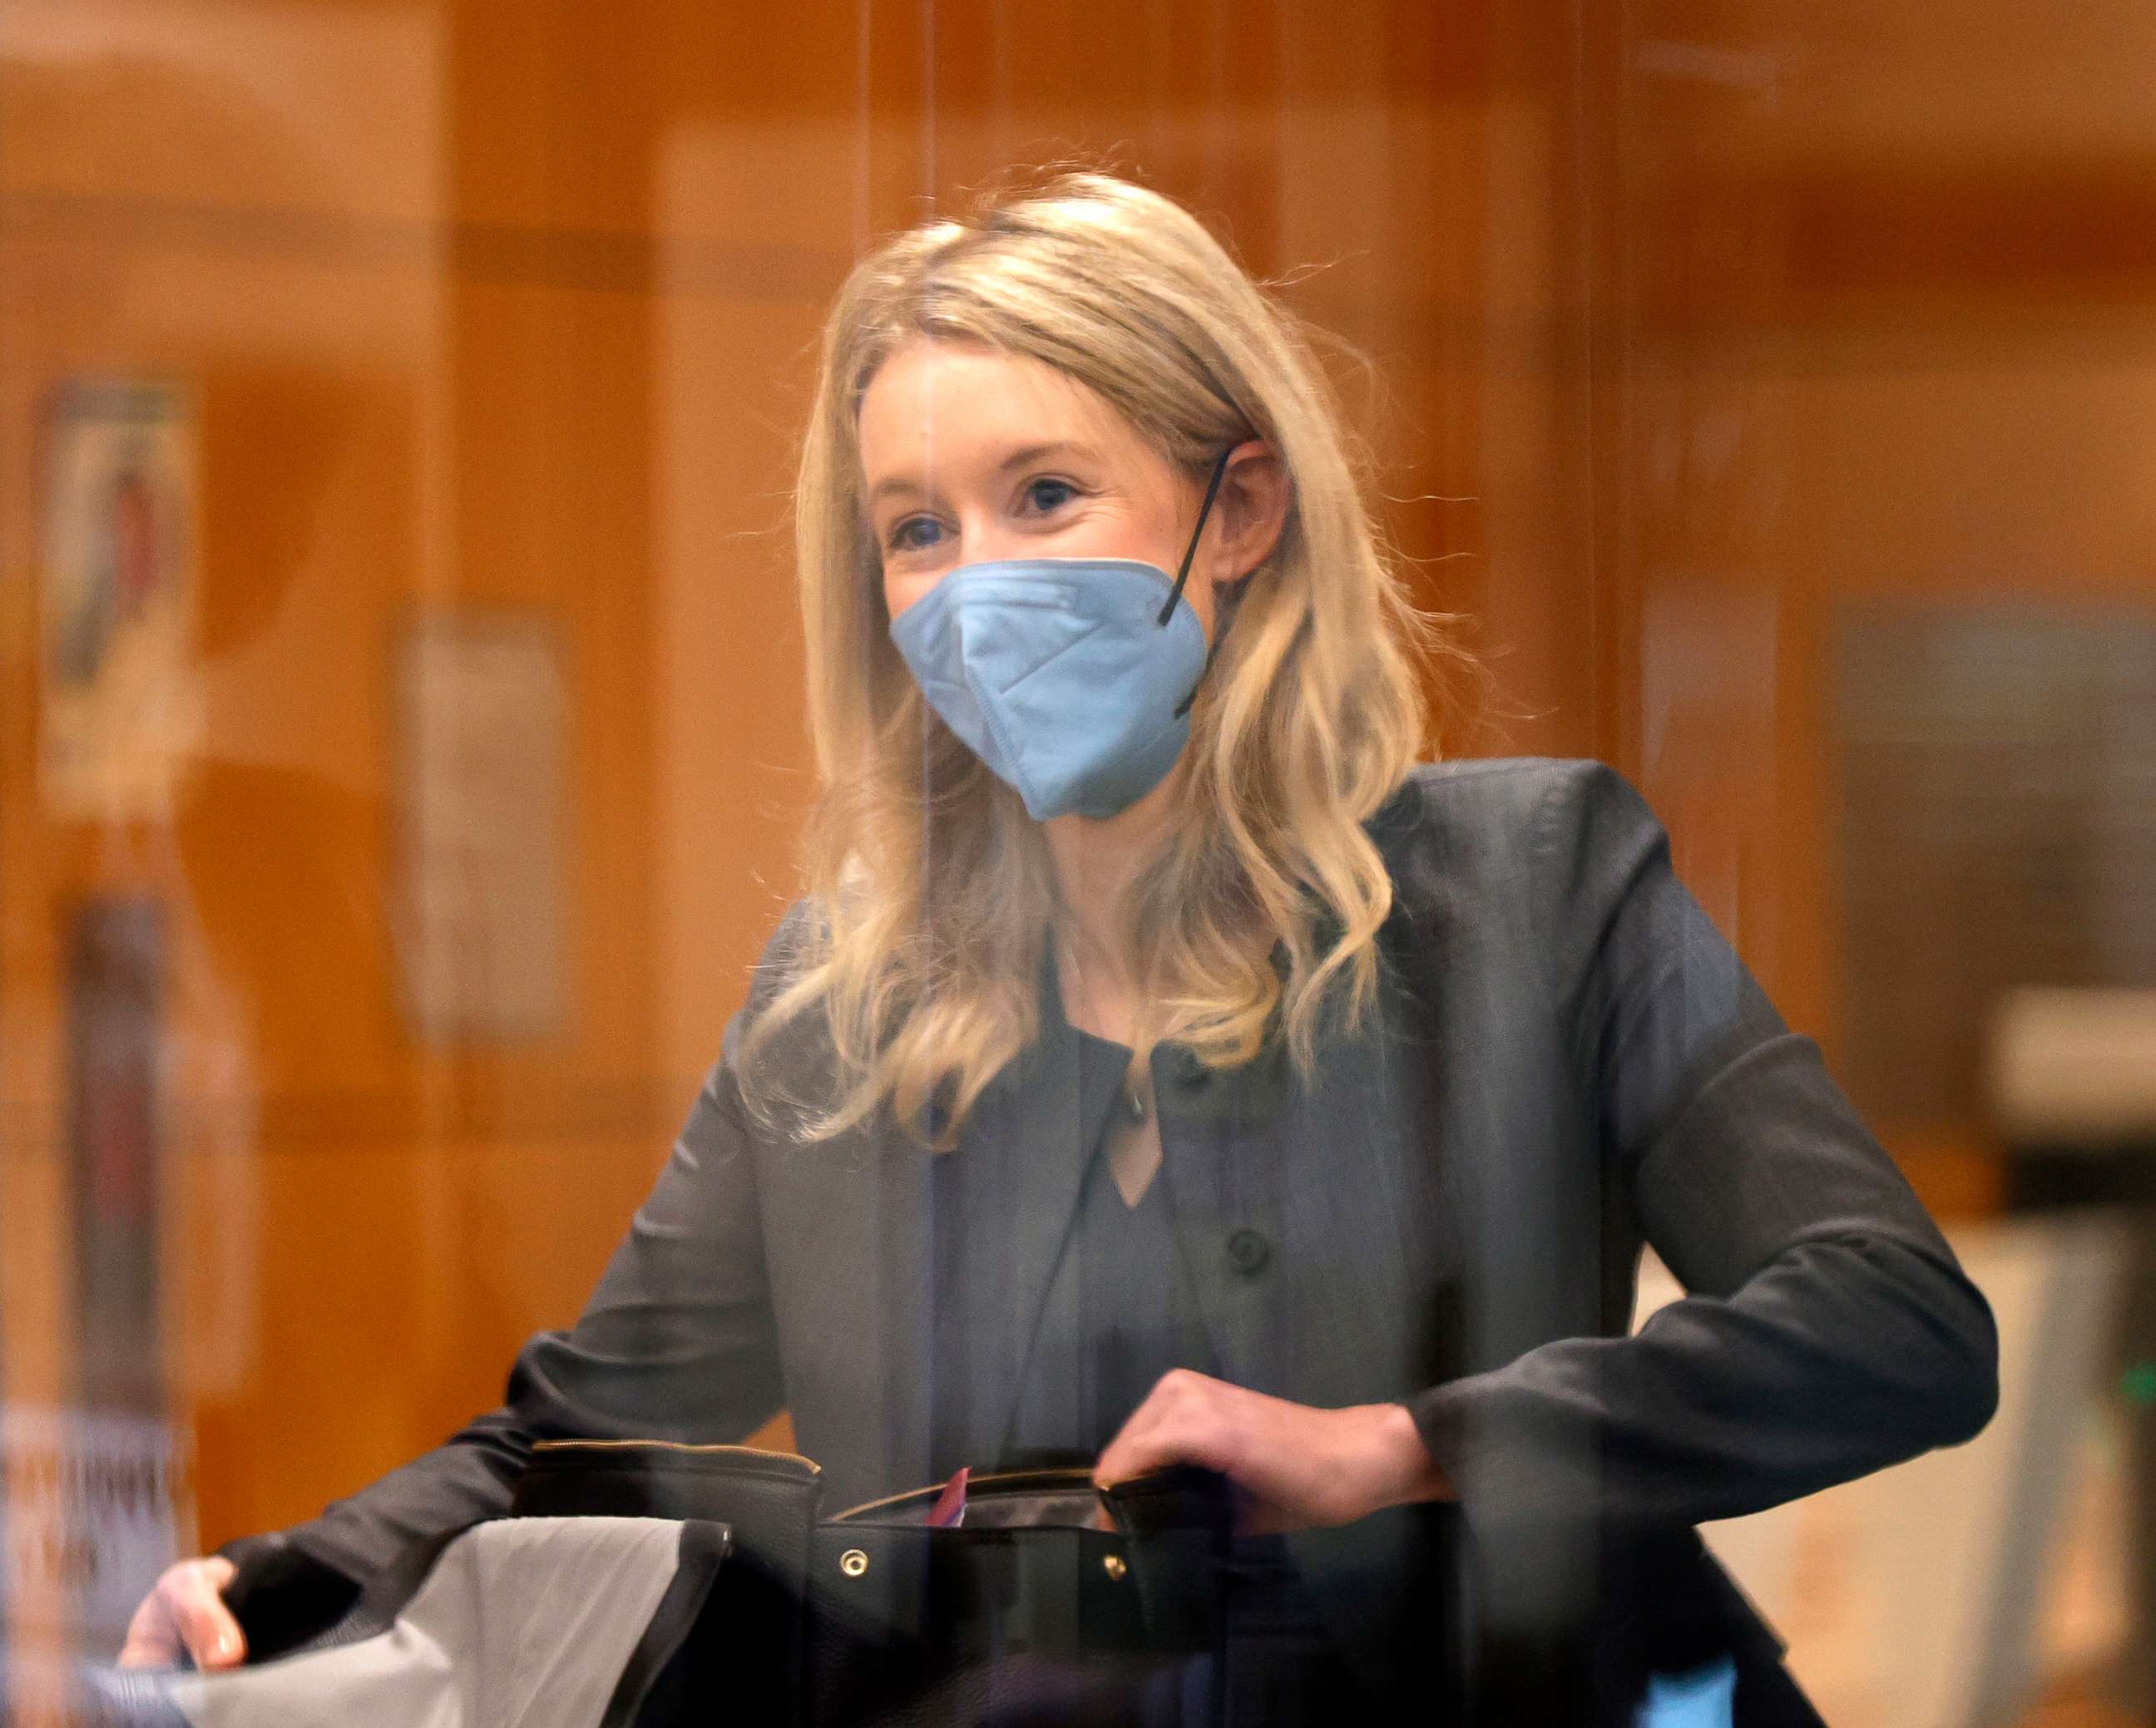 PHOTO: Theranos founder and former CEO Elizabeth Holmes goes through a security checkpoint as she arrives for her trial at the Robert F. Peckham Federal Building on Nov. 17, 2021, in San Jose, Calif.